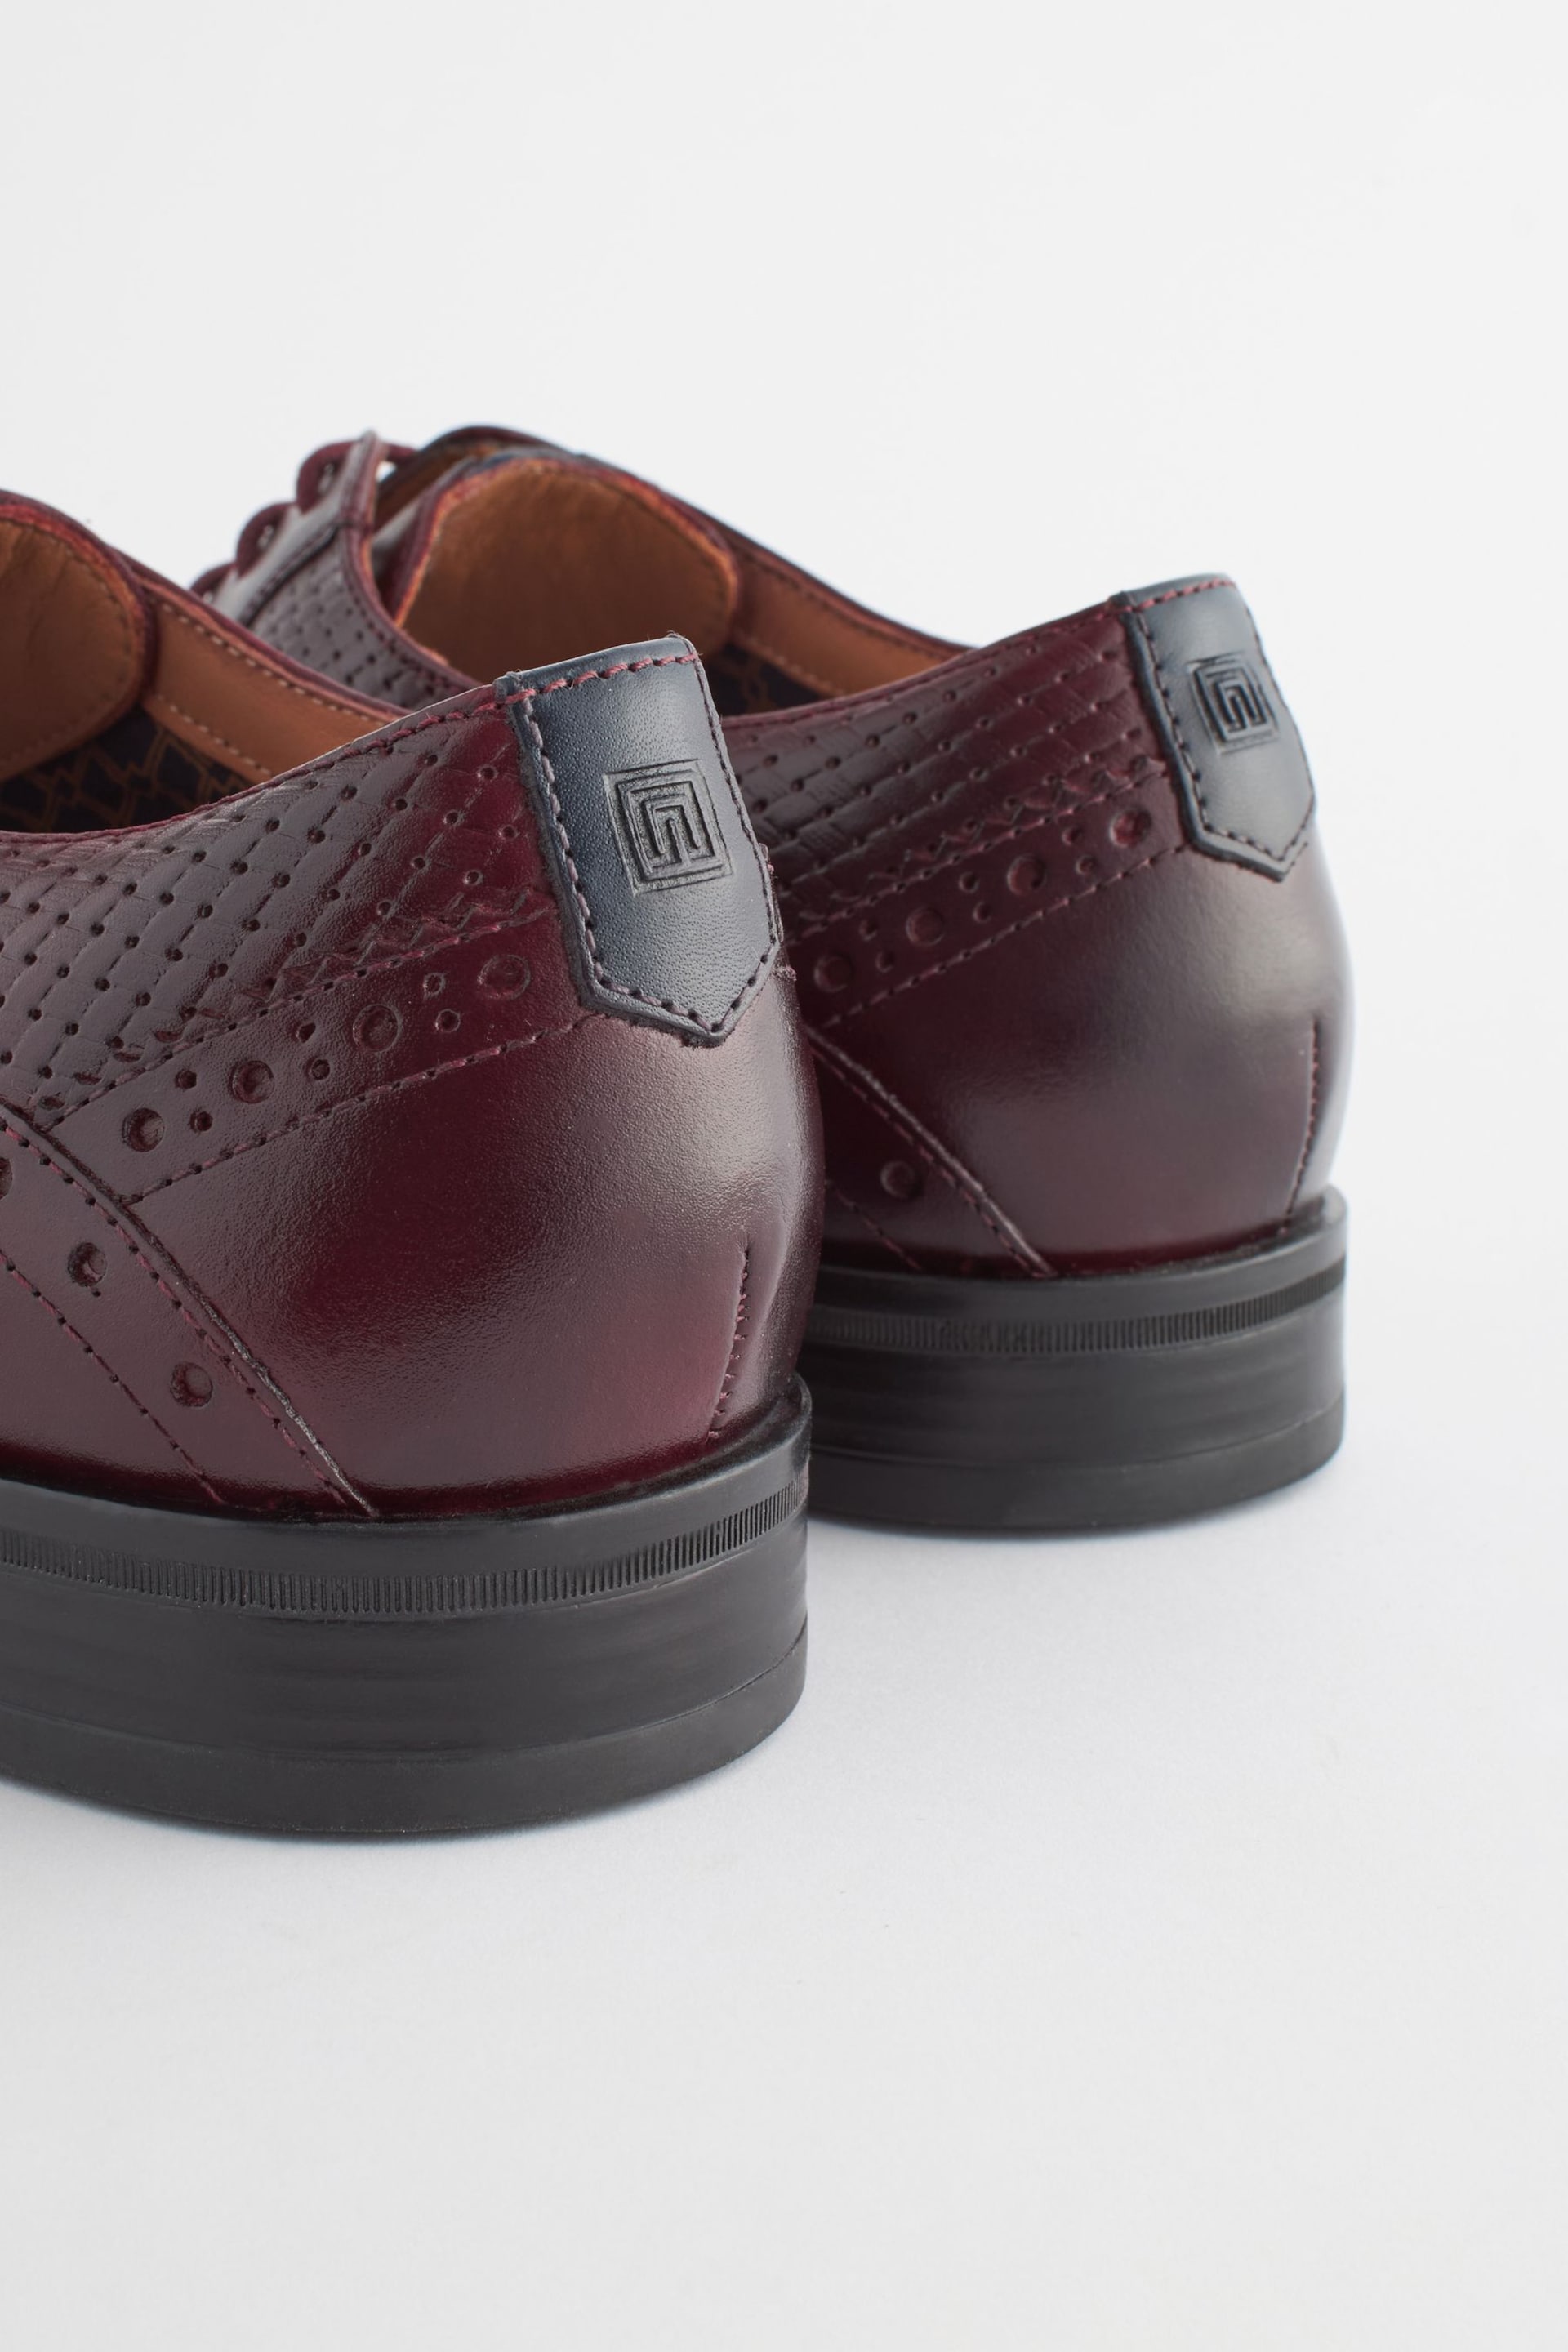 Burgundy Red Leather Embossed Wing Cap Brogues Shoes - Image 5 of 8